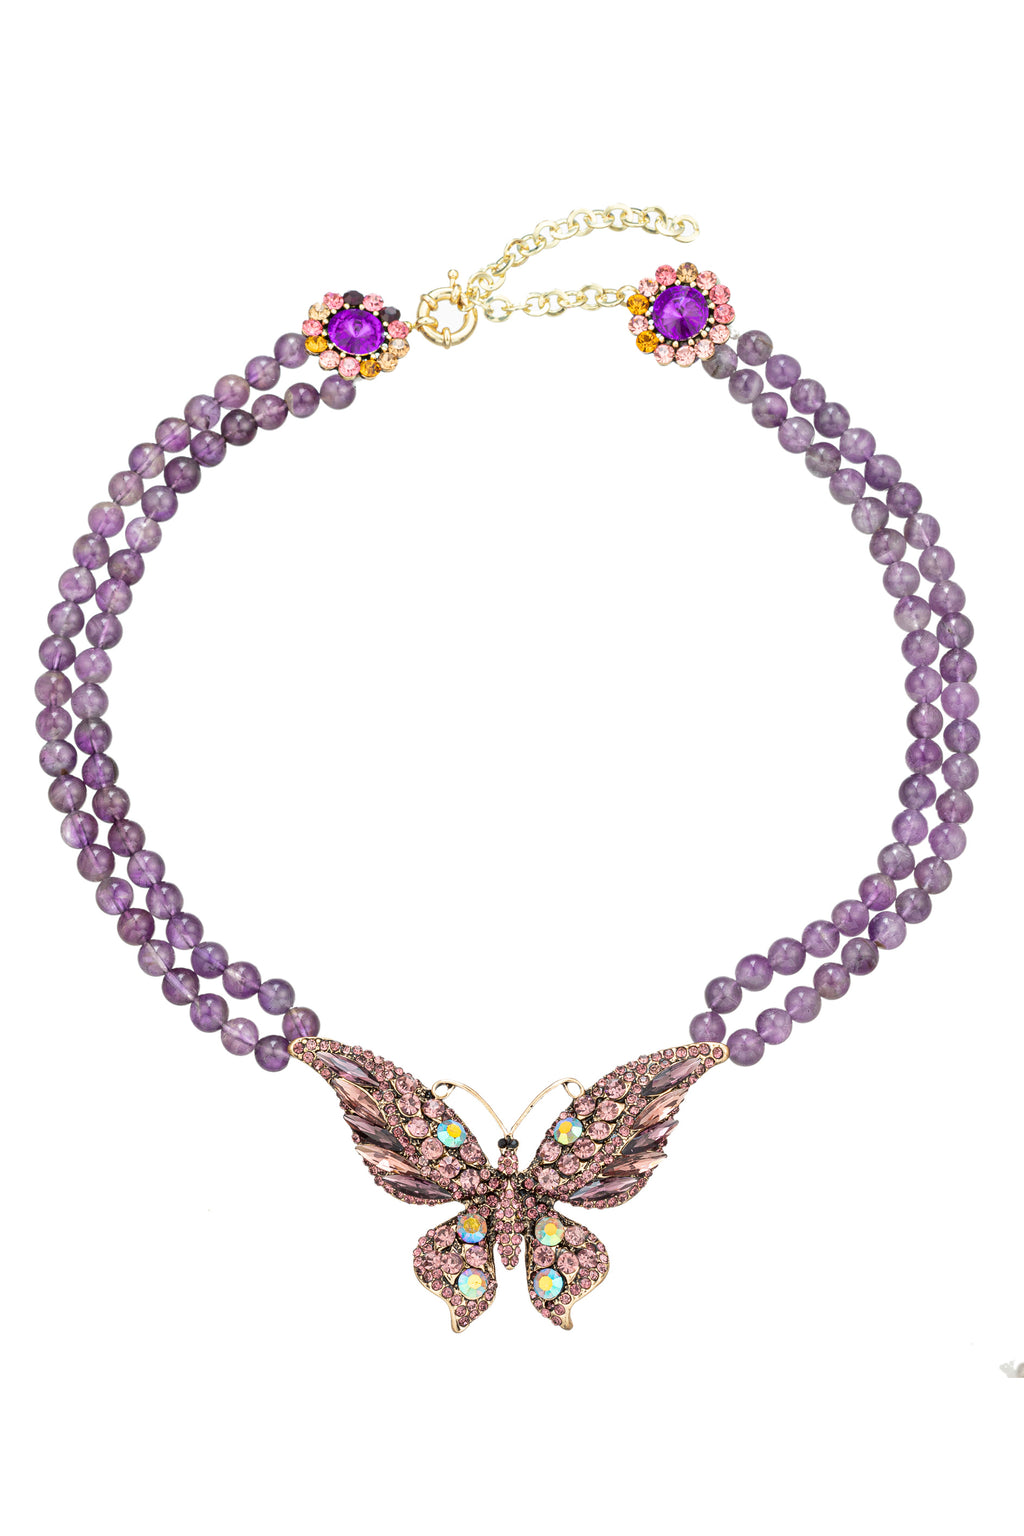 Purple agate beaded statement necklace with a glass crystal butterfly pendant.